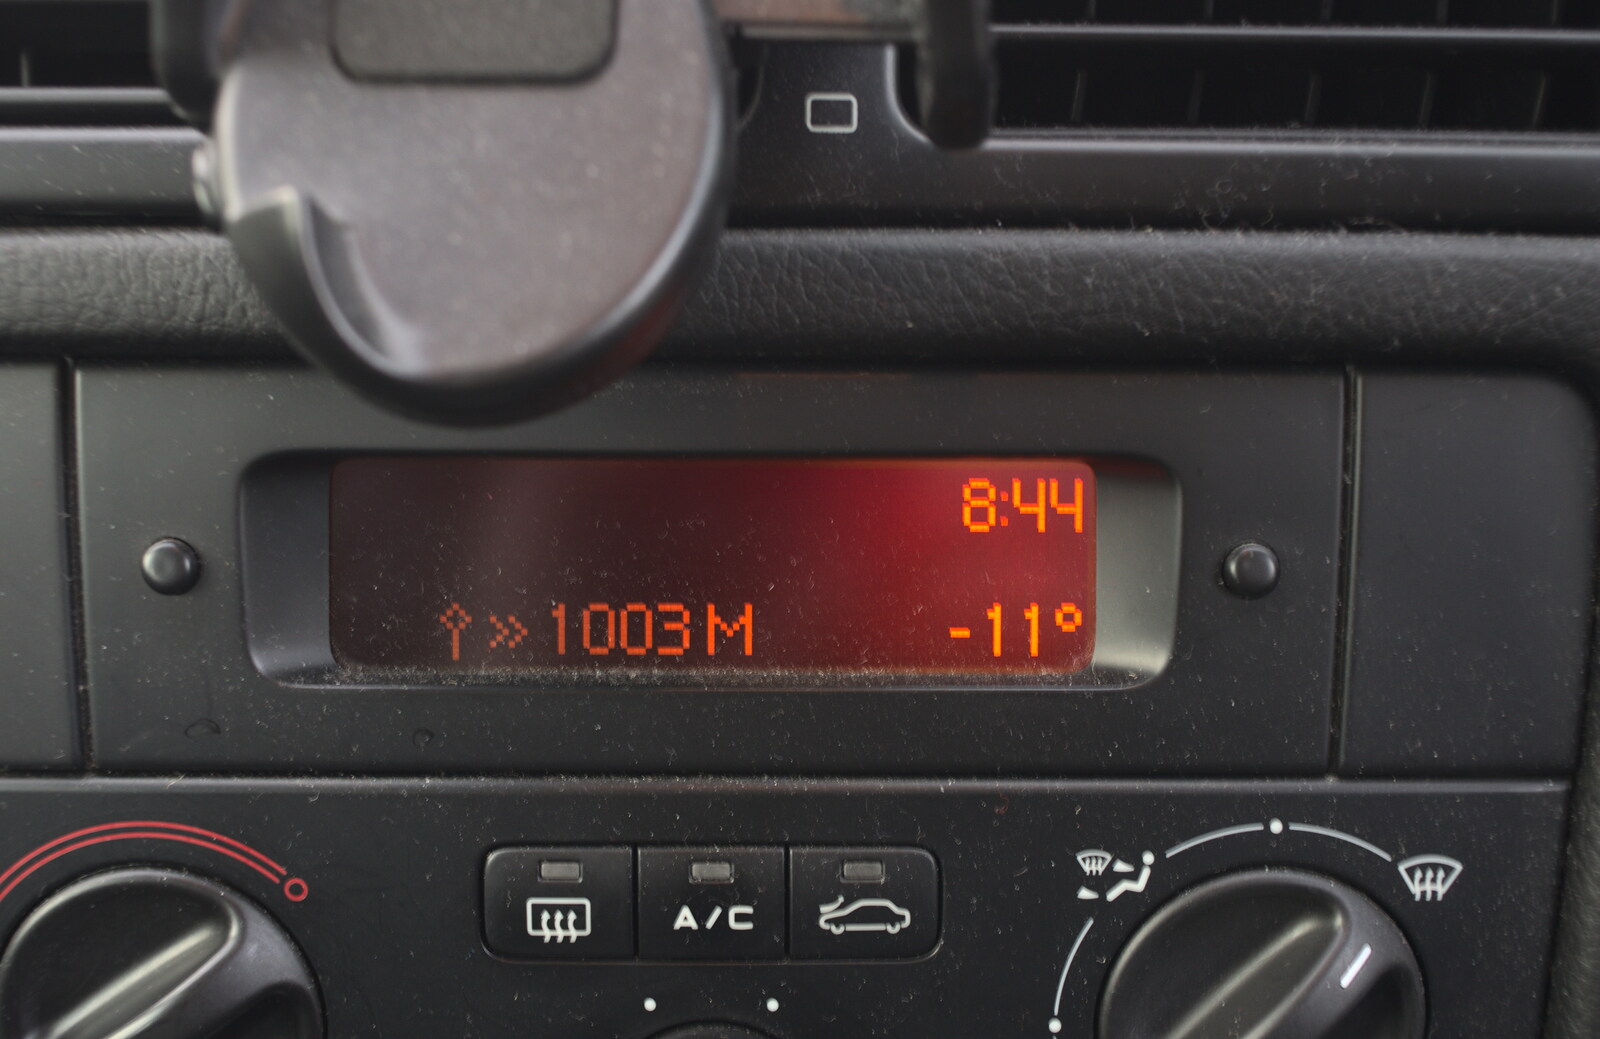 The car reckons it's -11°C from A Couple of Snow Days, Brome, Suffolk - 16th January 2013